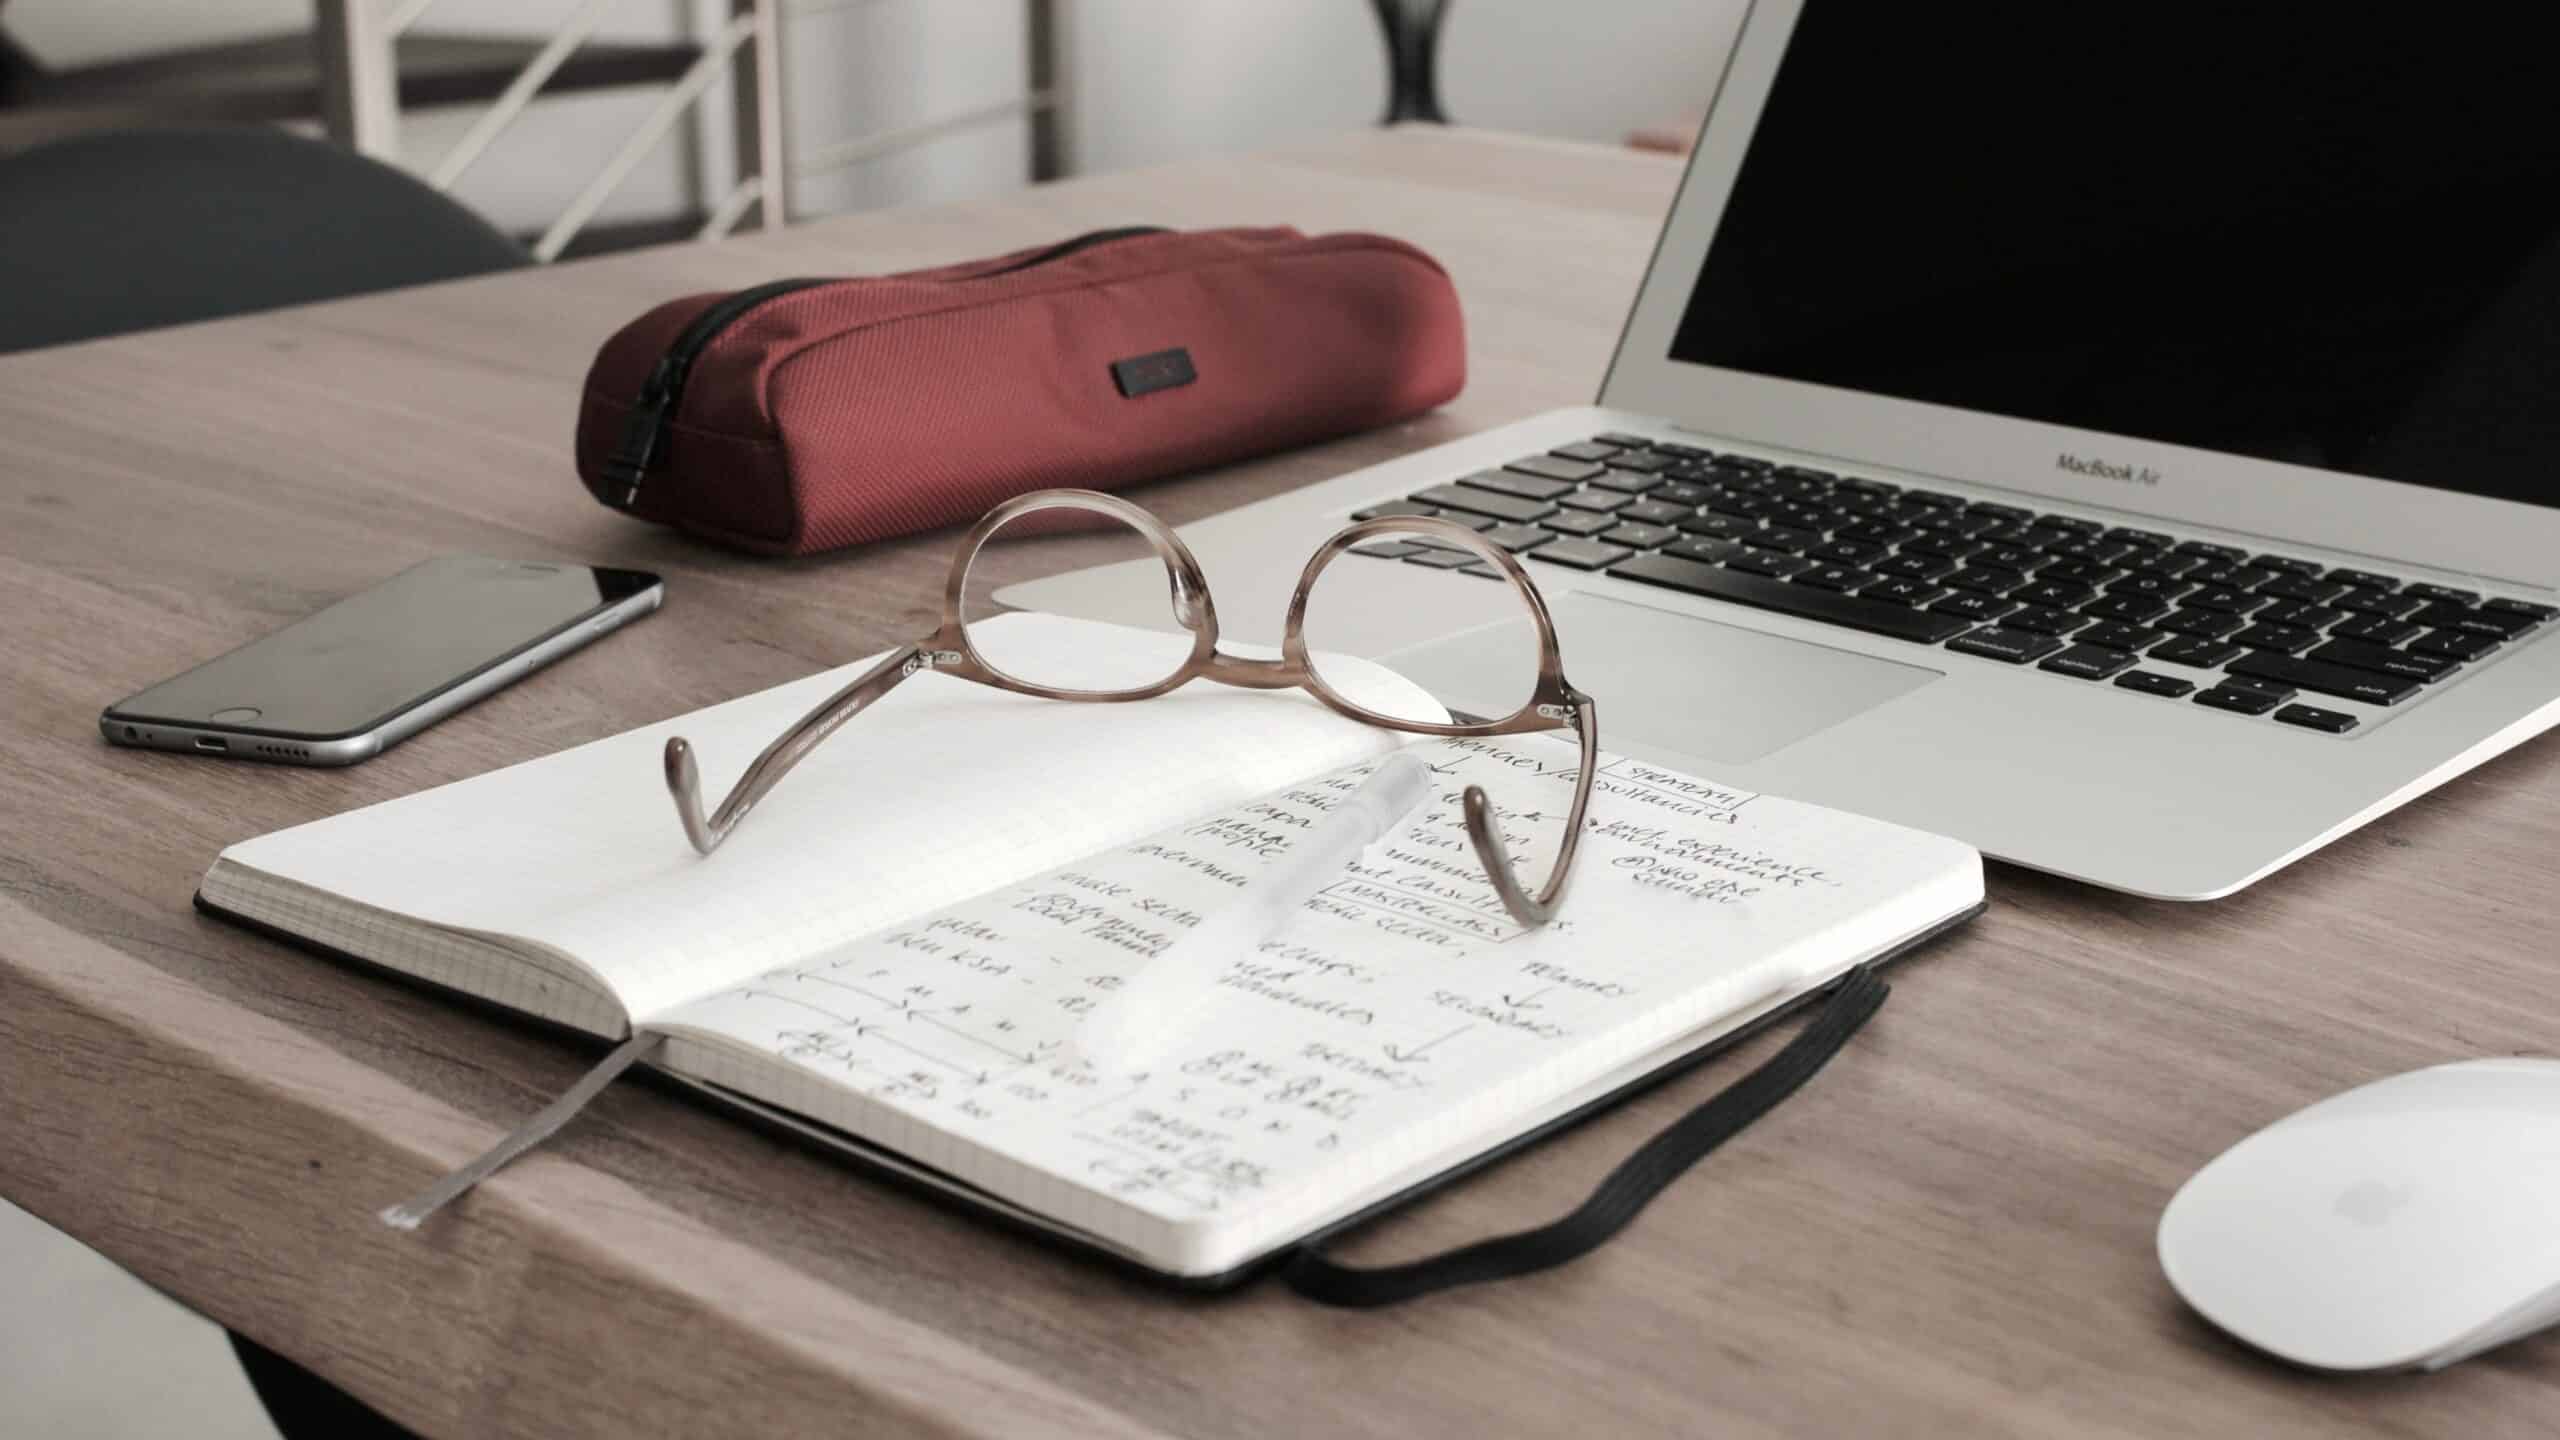 Reading glasses holding open a notebook with notes written in it about behavioral health billing, next to a MacBook Air, pencil case, and iPhone